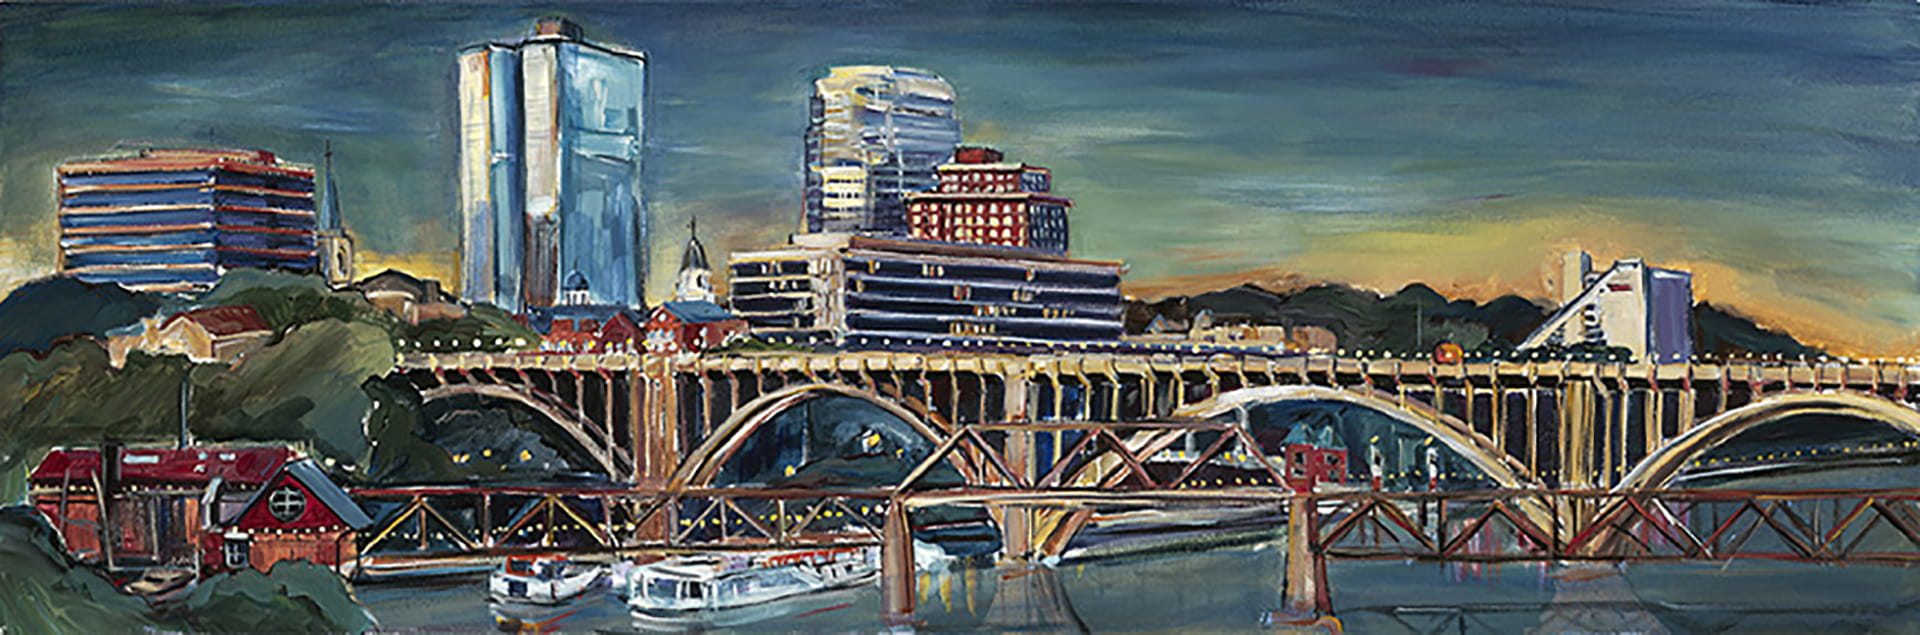 Knoxville River Escape Heather Whiteside 2015